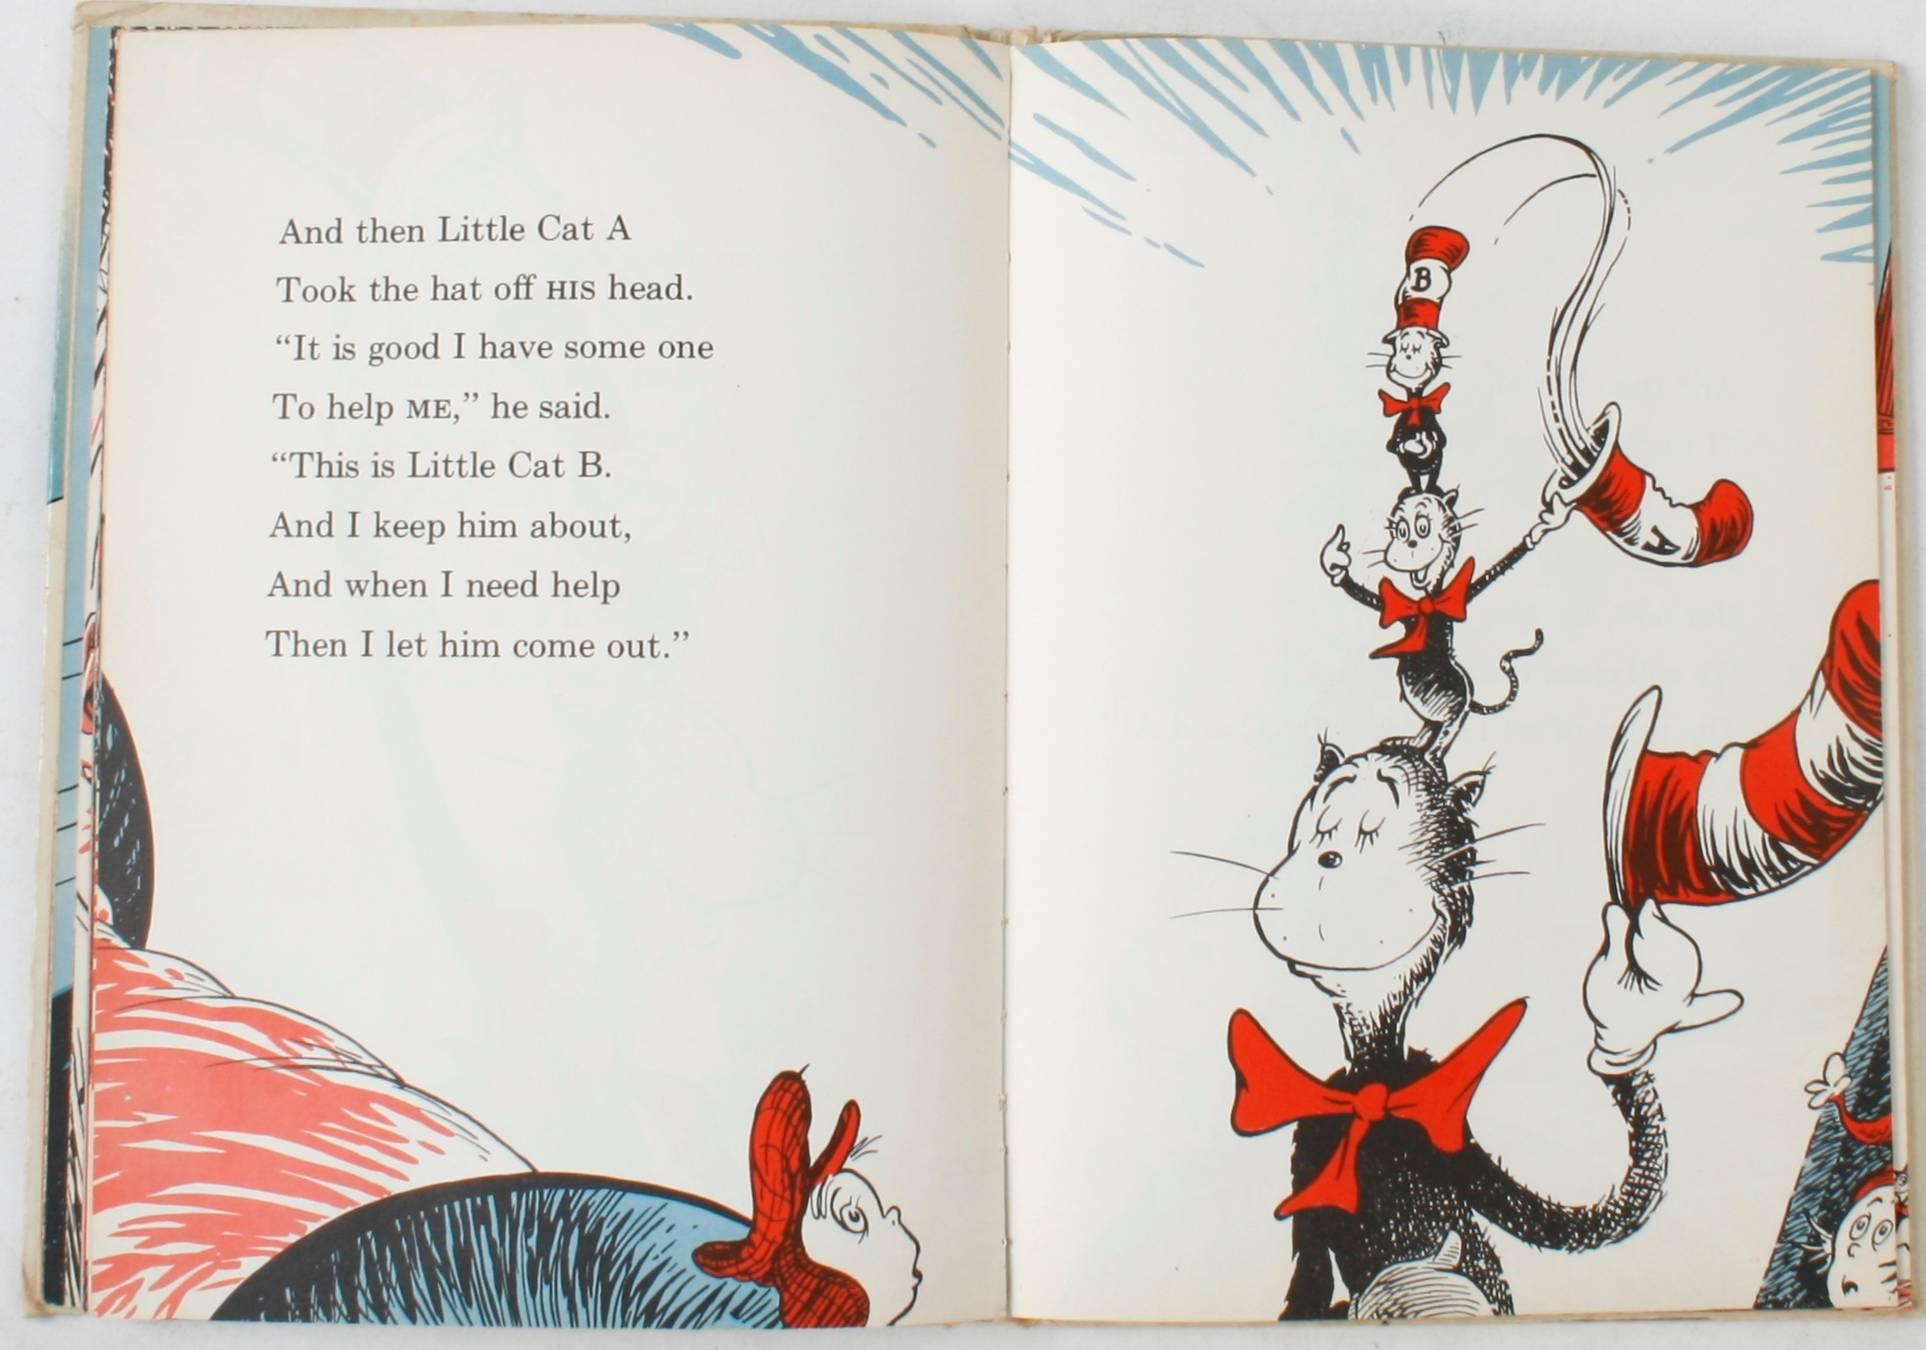 American The Cat in the Hat Comes Back, First Edition by Dr. Seuss